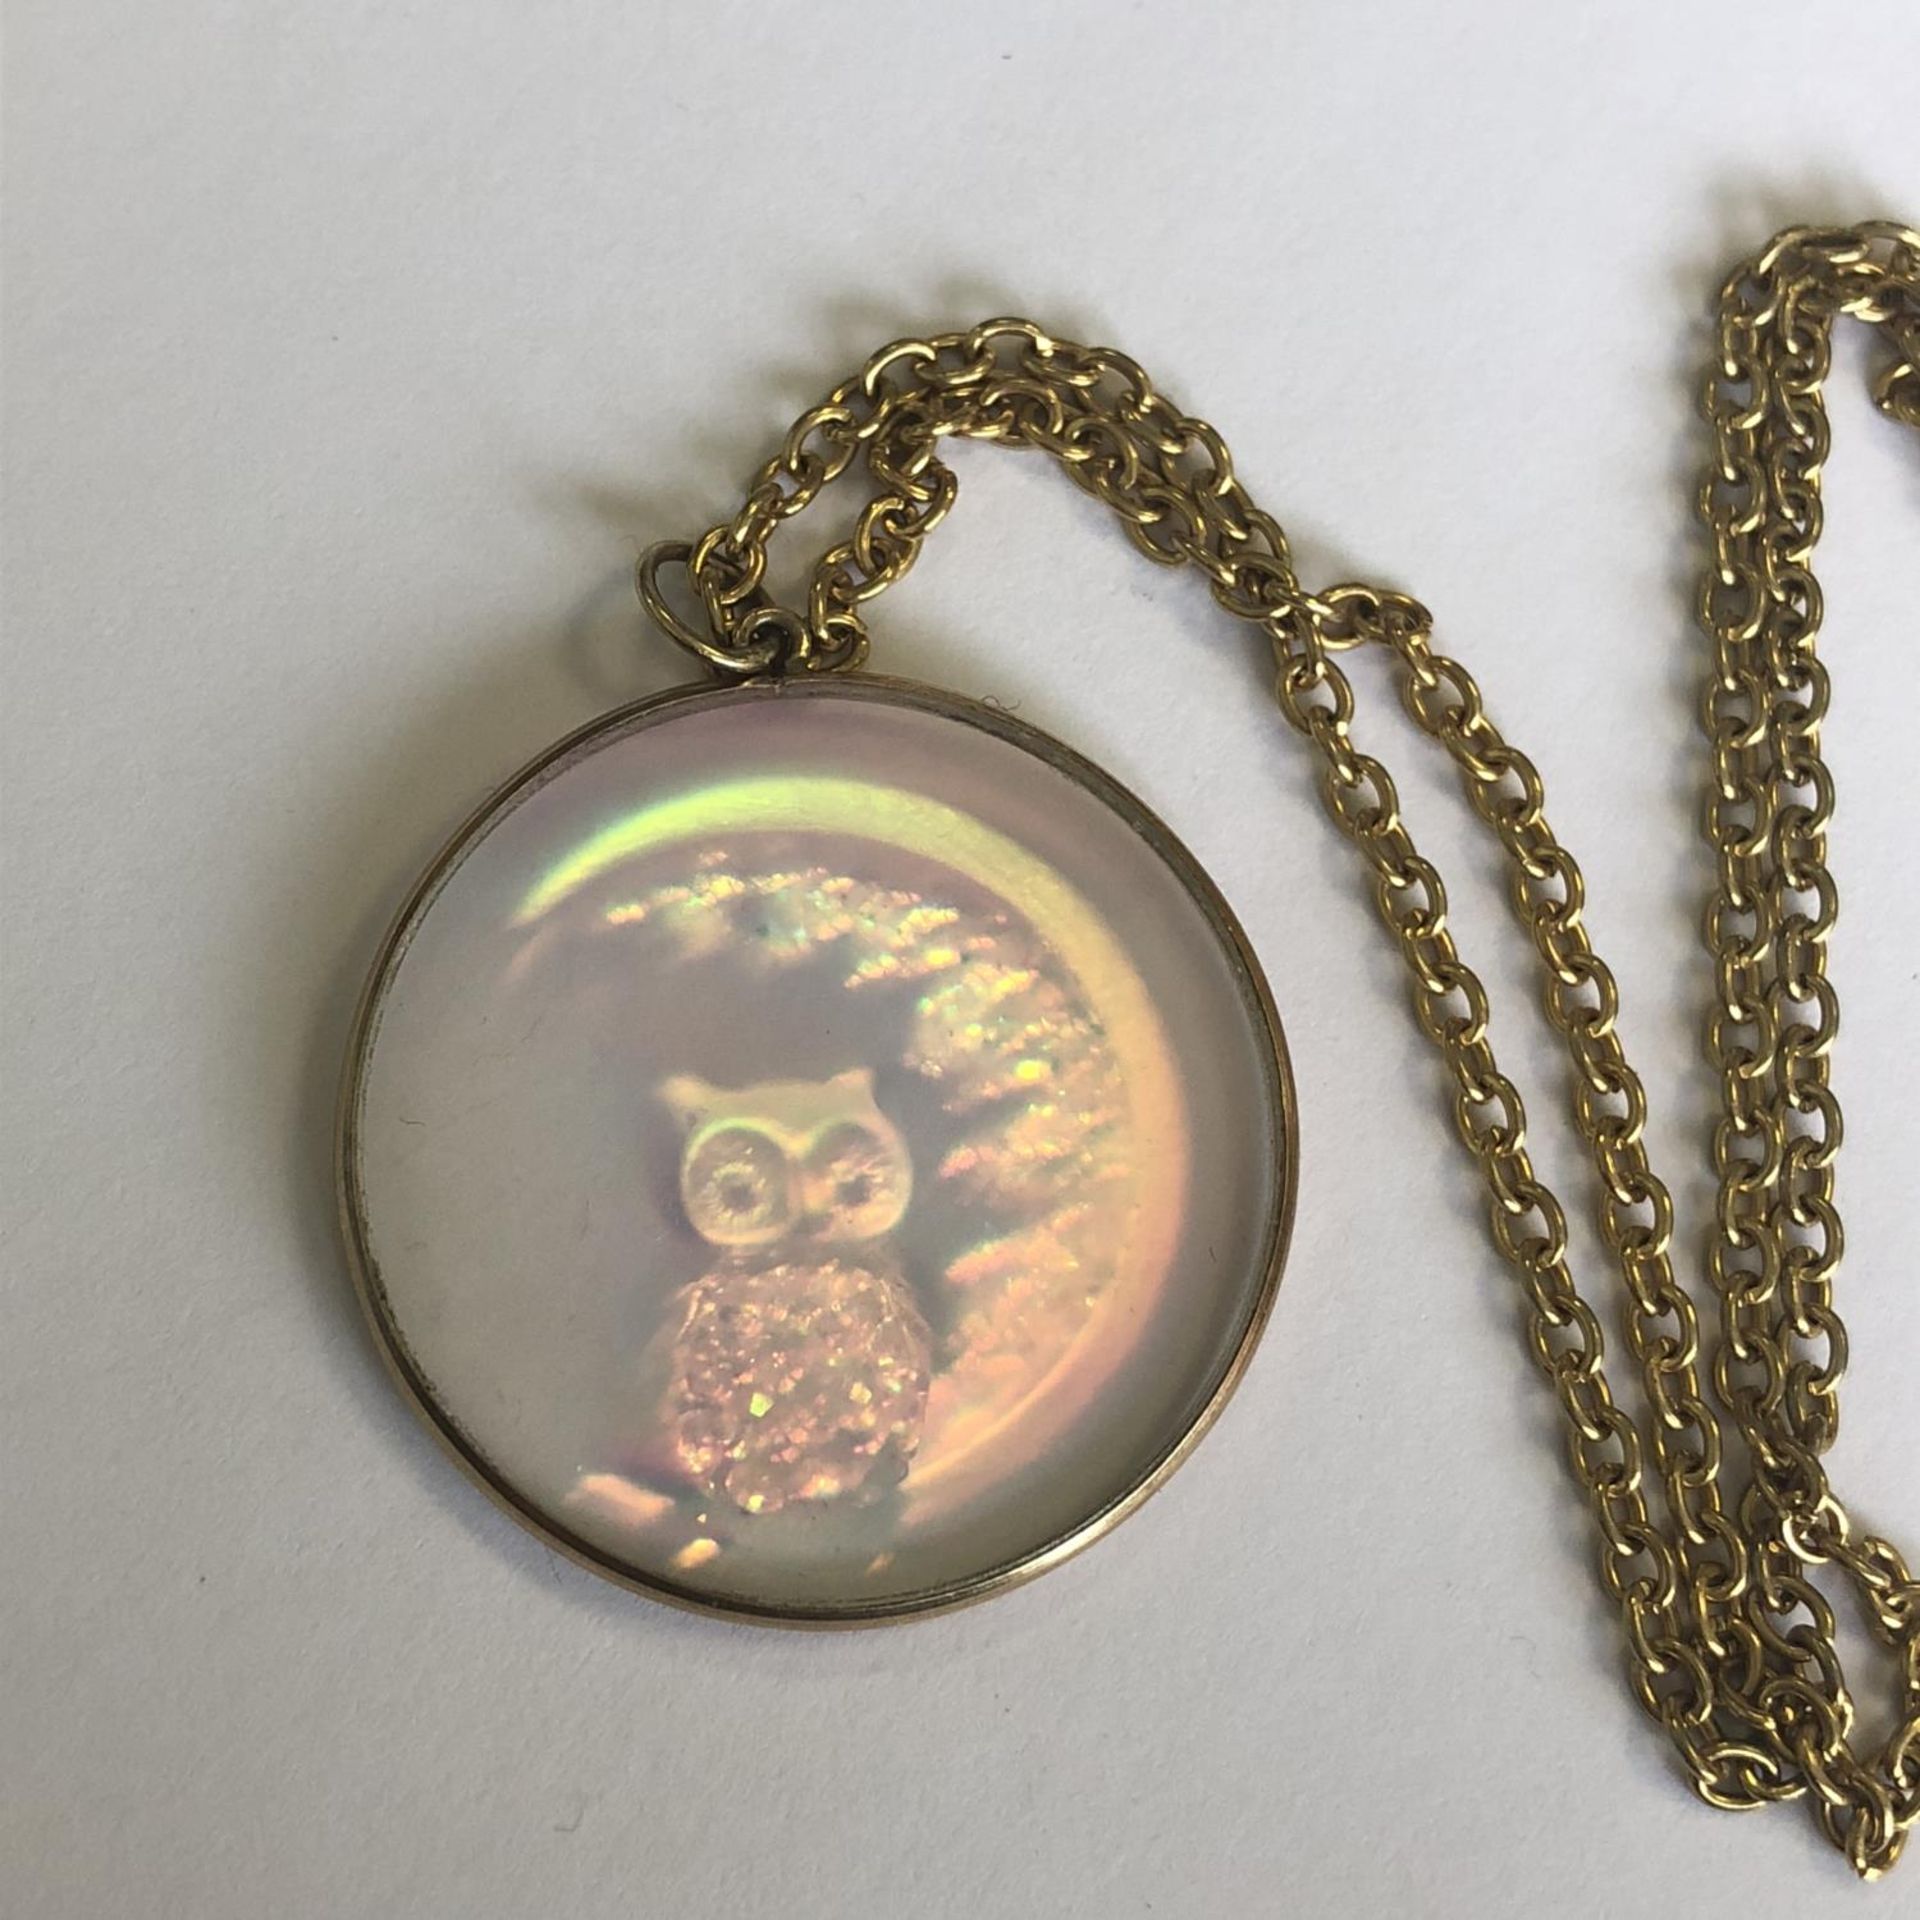 A vintage retro holographic owl pendant in yellow metal mount (untested) on a yellow metal chain